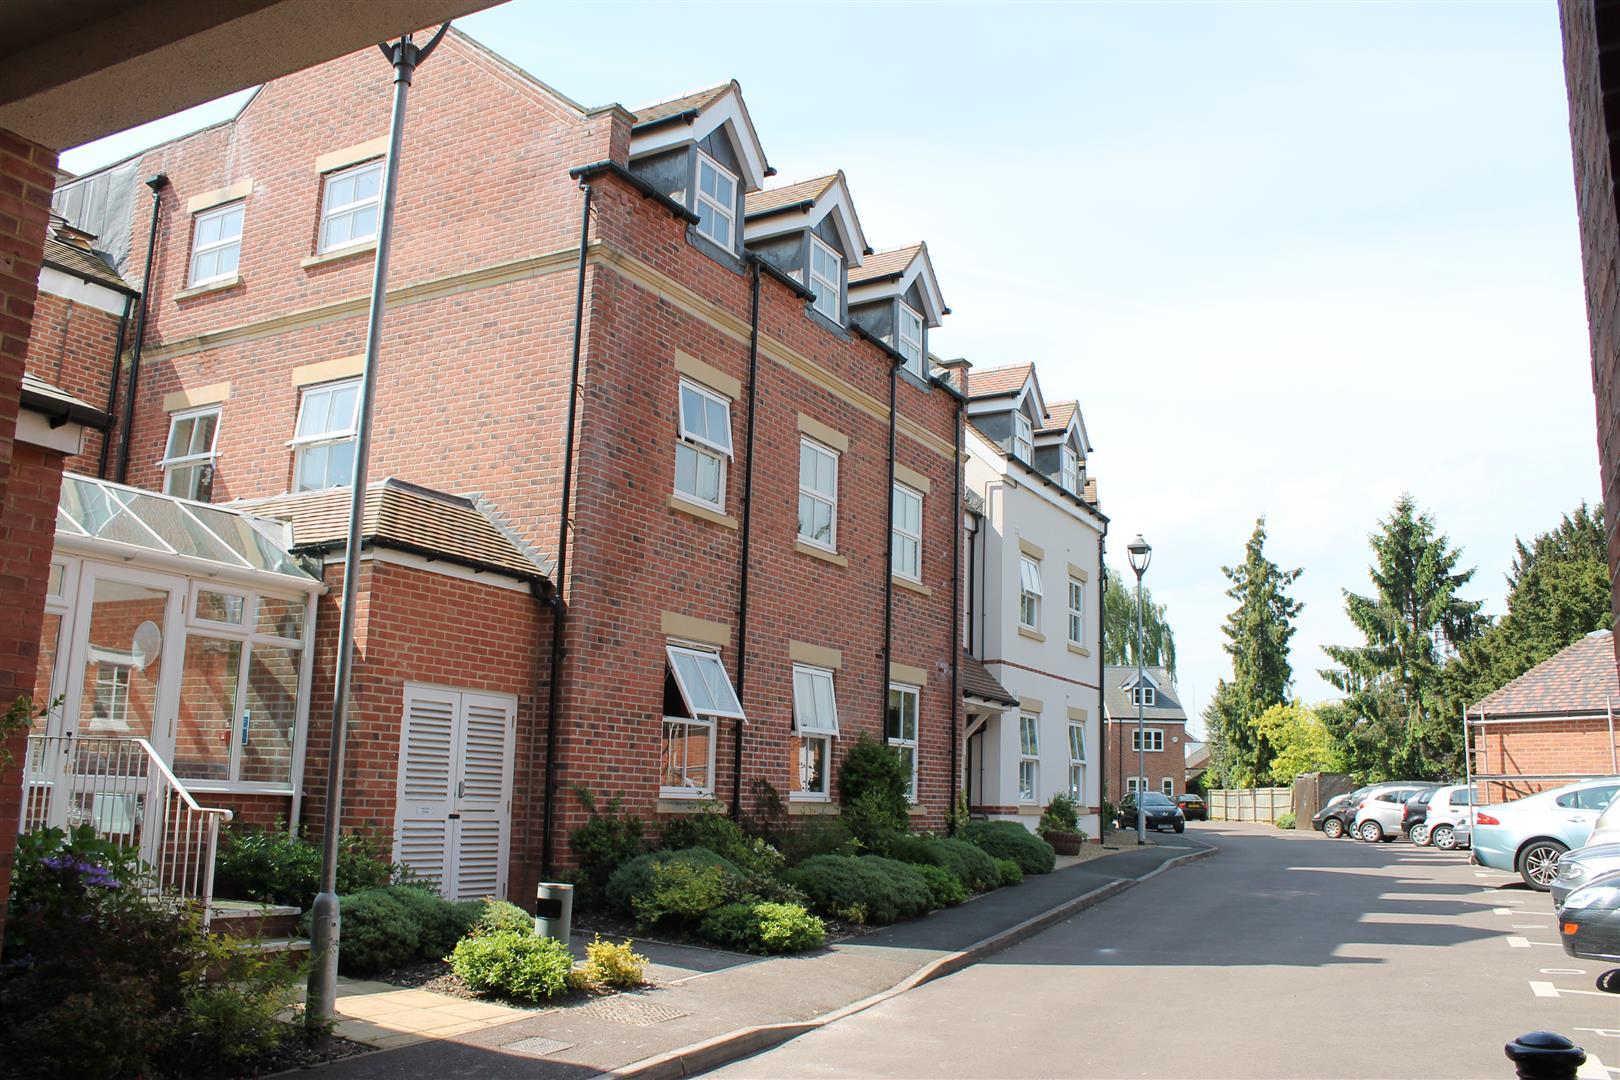 Stokes Mews, Newent, Gloucestershire